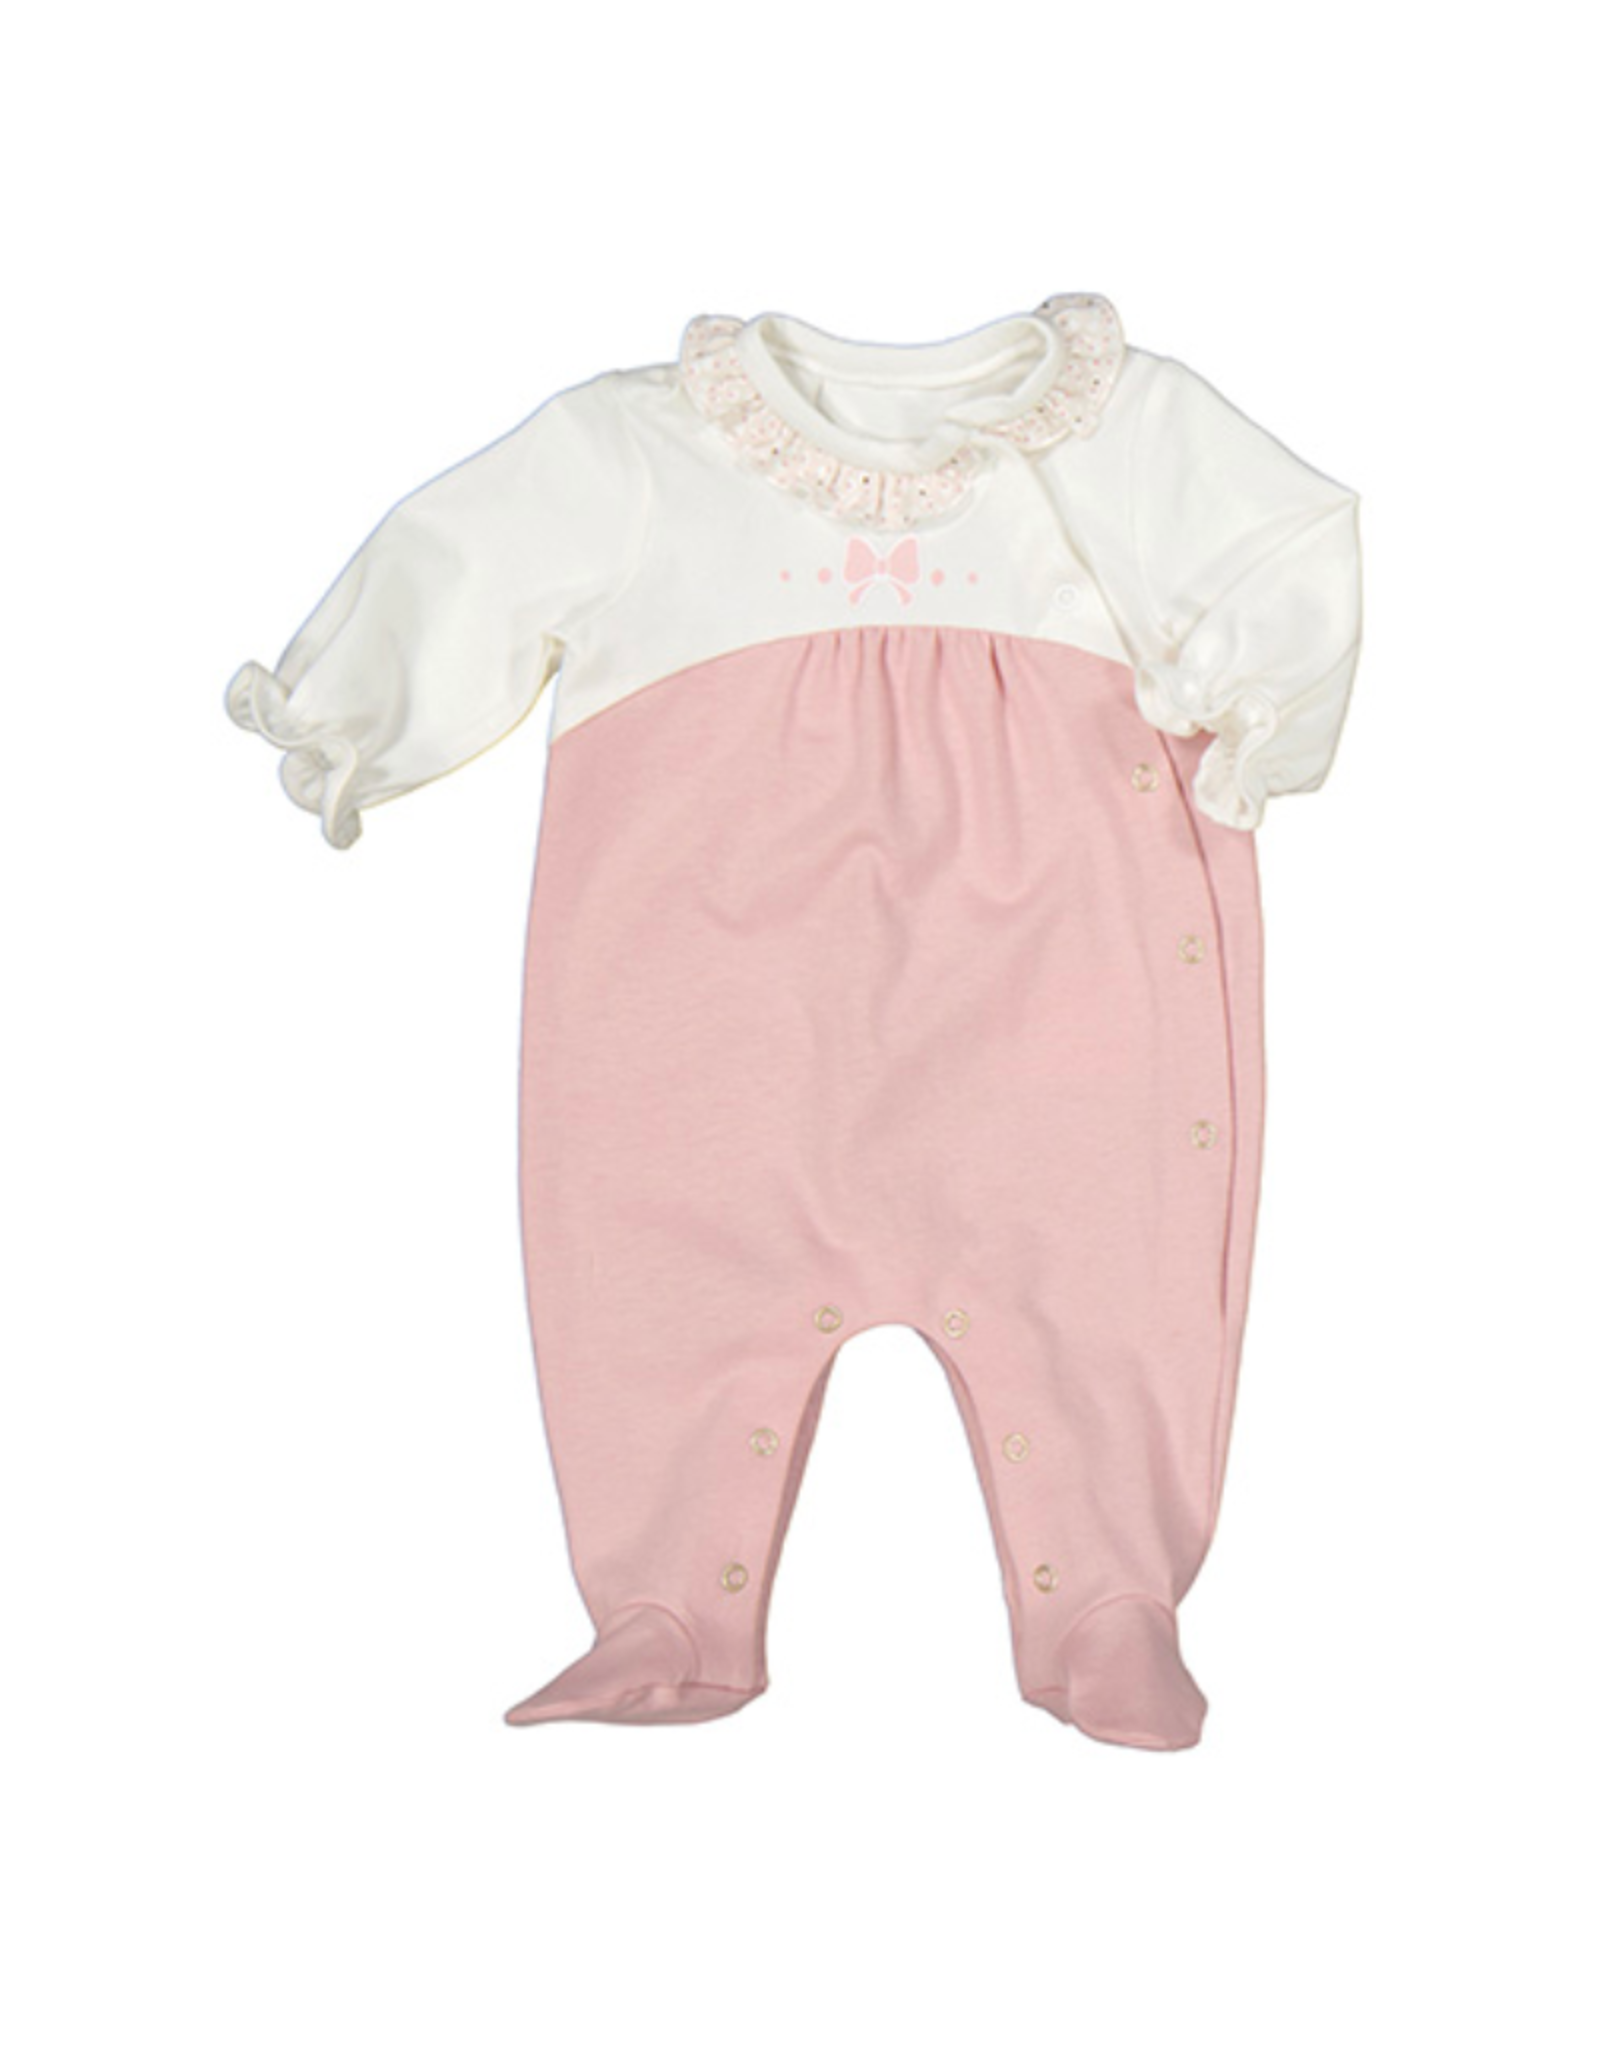 Mayoral Pink and Ivory Footie with Bow Detail